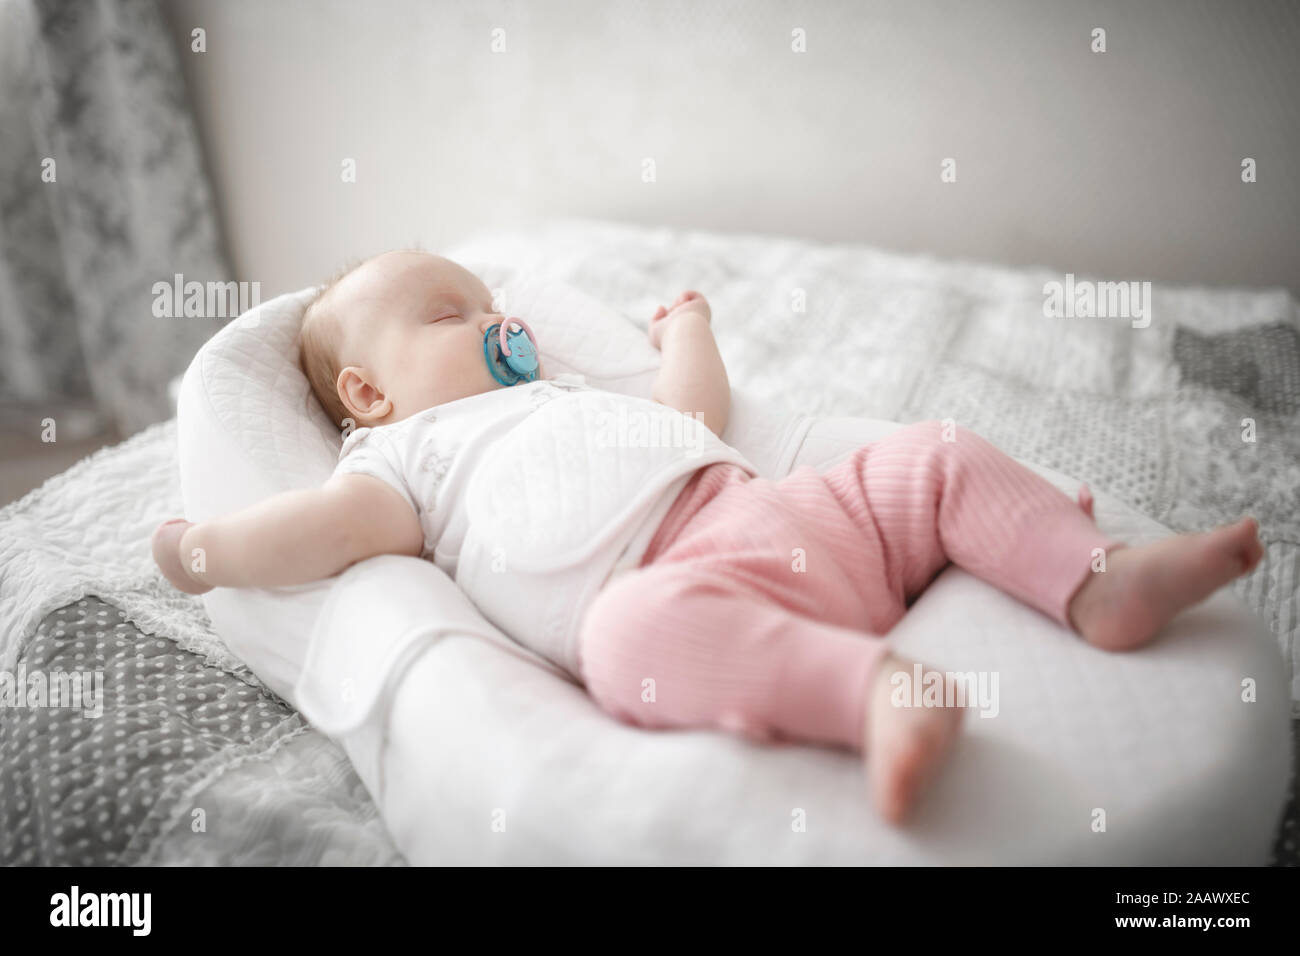 Cute baby girl sleeping on the bed Stock Photo